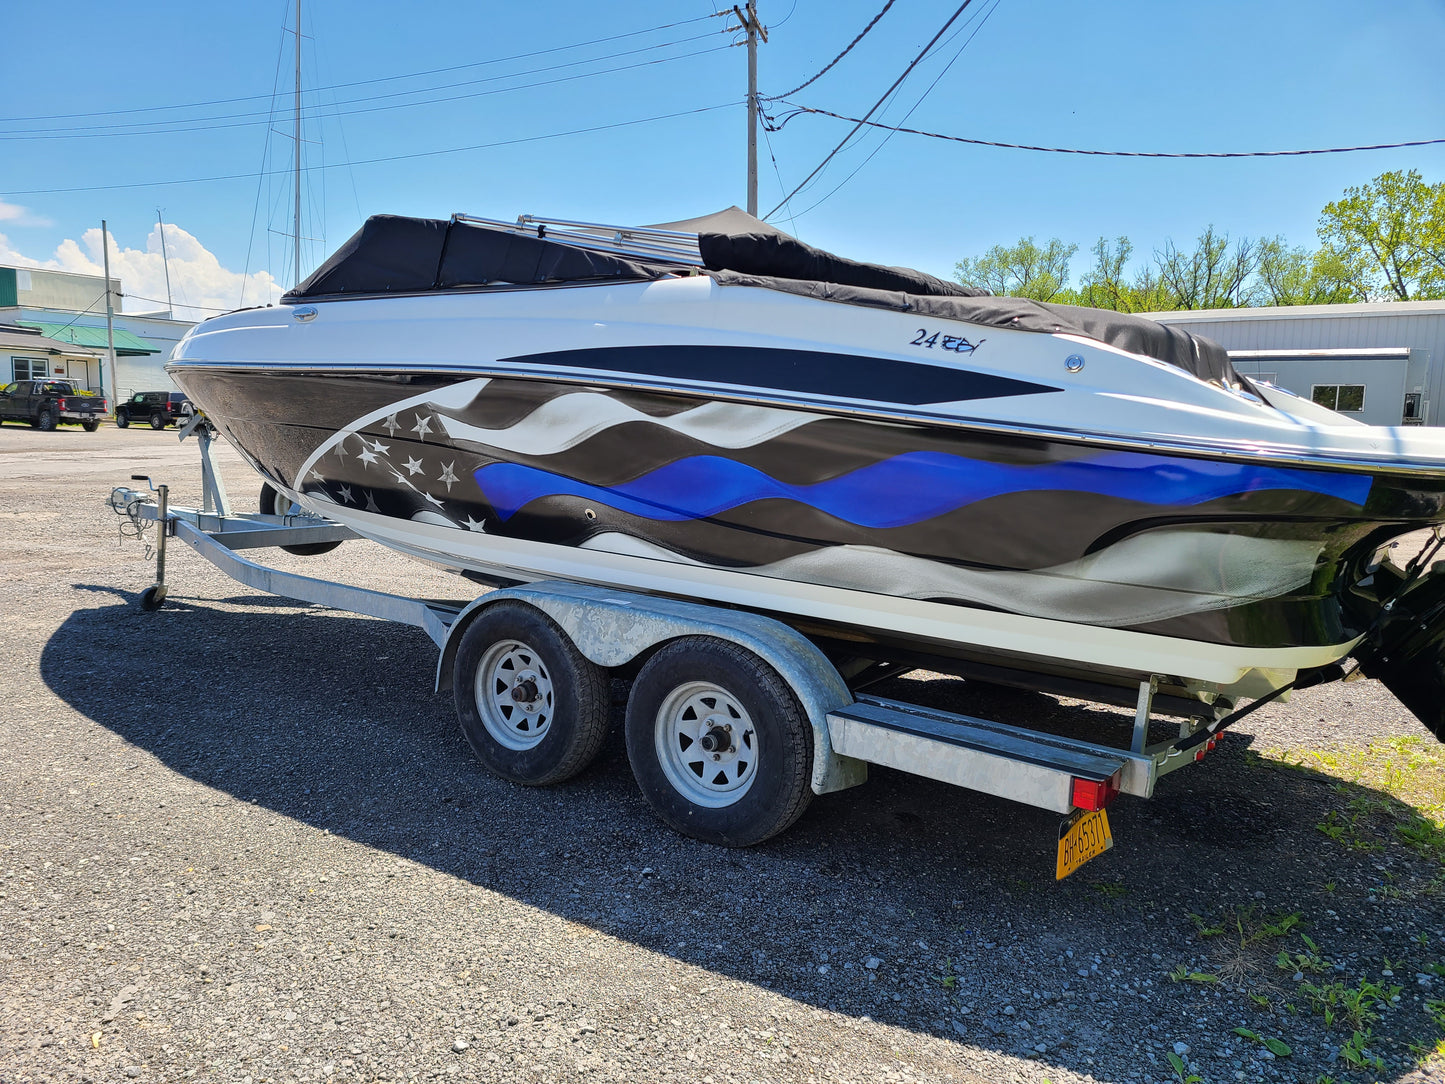 Boat wrap, boat hull wrap installed on power boat.  American flag wrap with blue stripe installed on boat.